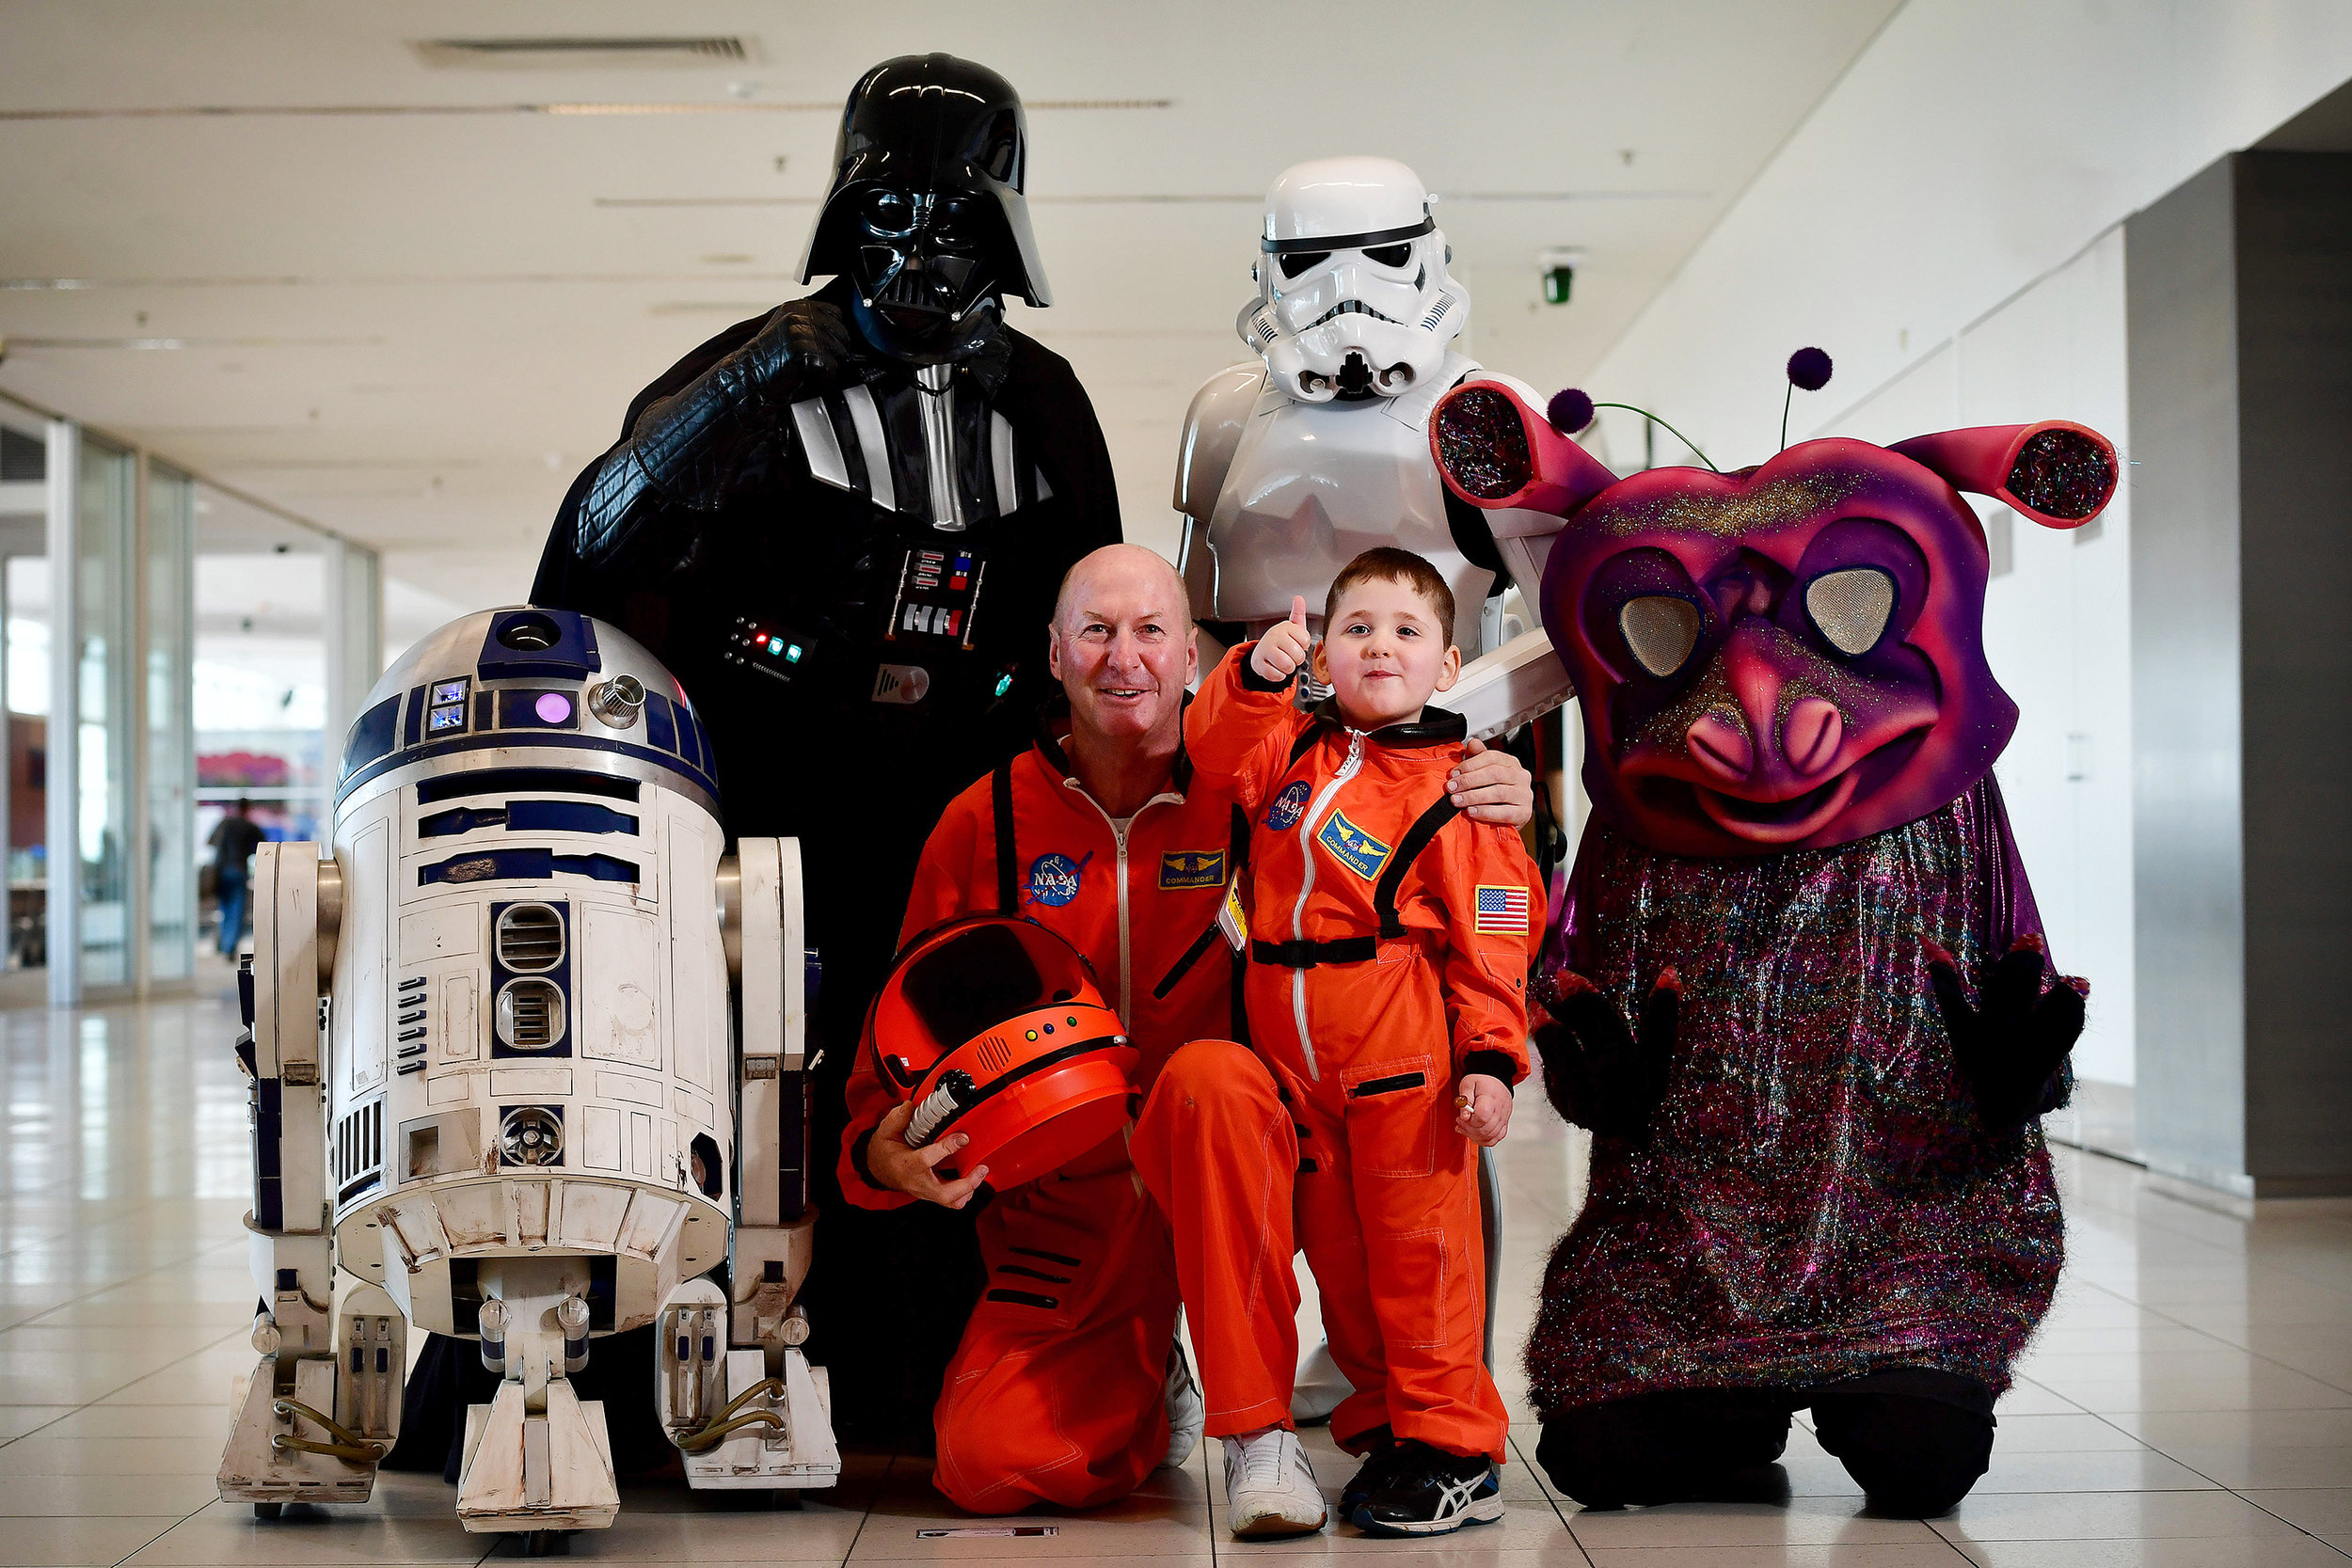 CHP_Export_171941334_Dwayne Franke 4 with his friends R2-D2 Darth Vader Andy the astronaut a storm t.jpg